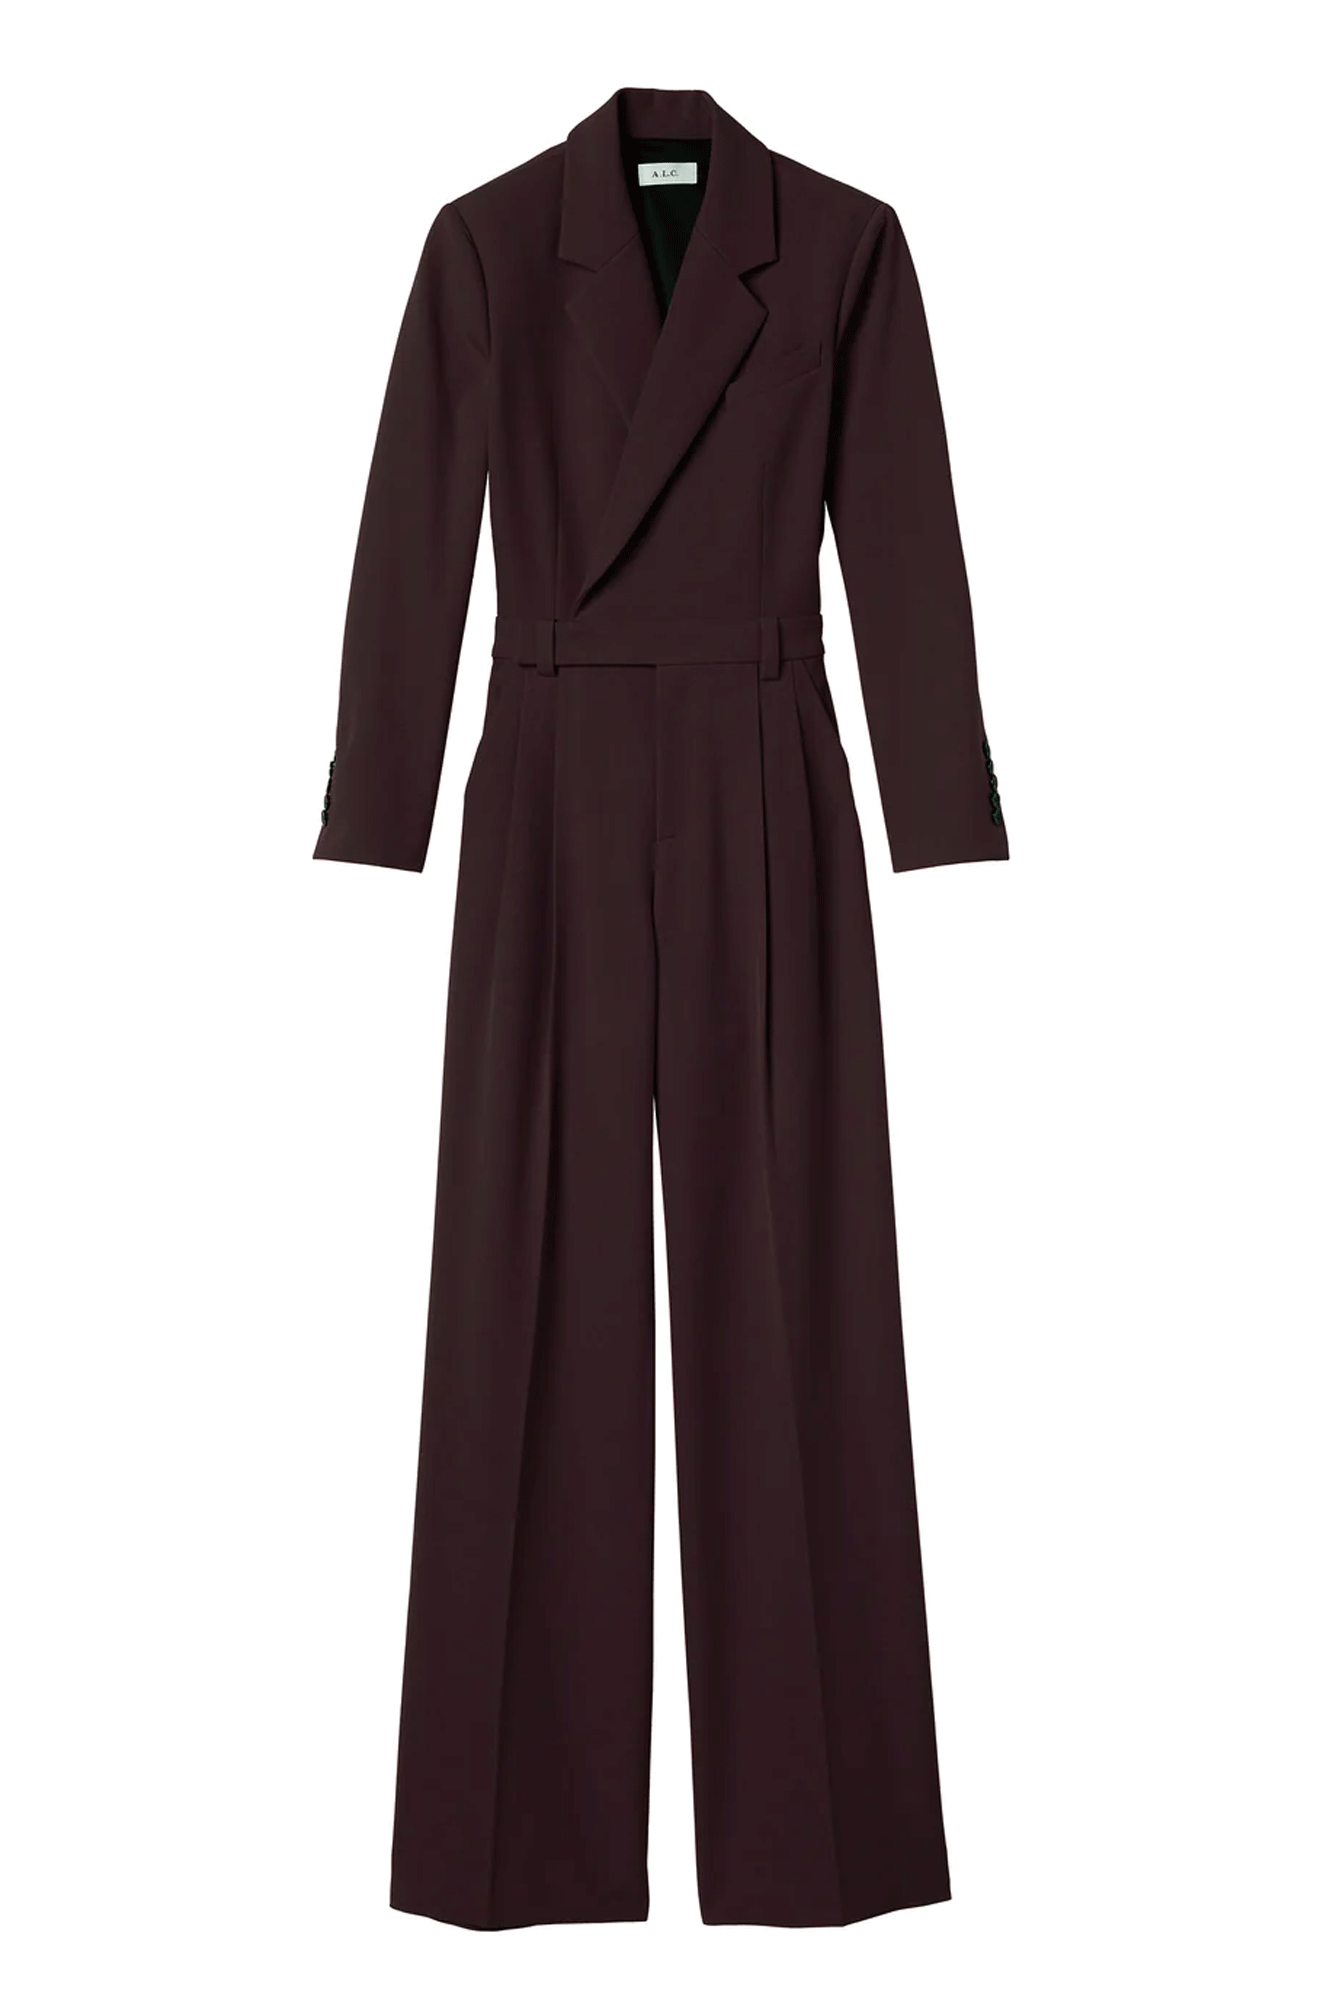 The Tatum Jumpsuit from A.L.C. is perfect for any occasion. It features a tailored silhouette designed with modern tuxedo-inspired elements, including a two-piece look with notched lapels, pleated wide legs, and an overlapping back cutout. Crafted out of structured cady fabric in a vibrant red shade, this jumpsuit will turn heads.